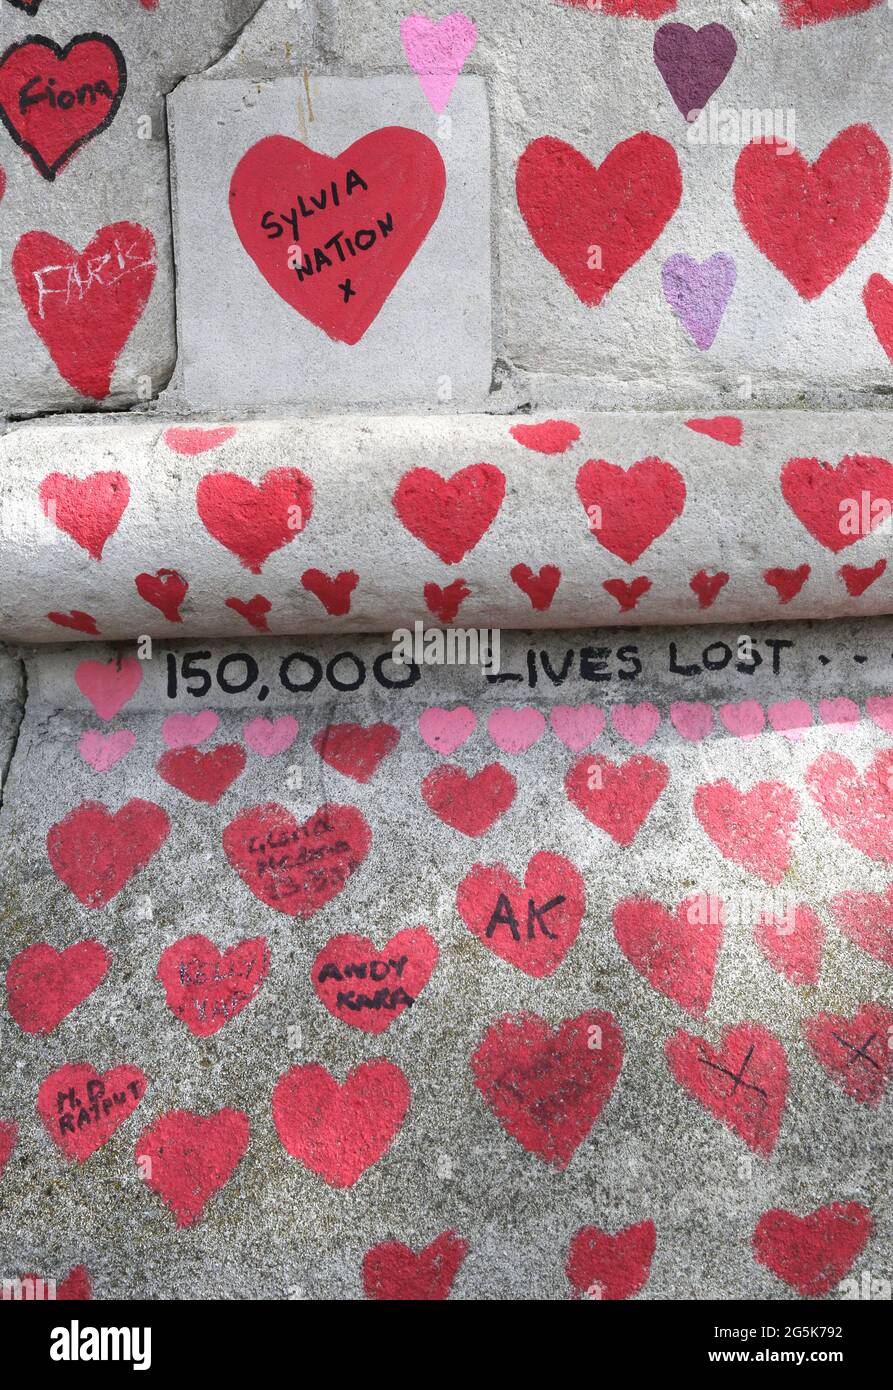 View of hearts and messages on the National Covid Memorial Wall on the embankment on the south side of the River Thames, opposite the Houses of Parliament. It provides a reminder just how tough the last year has been for many. The memorial continues to evolve - Originally one heart was drawn for each of the 150,000 people who died in the UK during the pandemic. Members of the public continue to add both hearts and personal messages as the memorial becomes a fixture of London life. Stock Photo